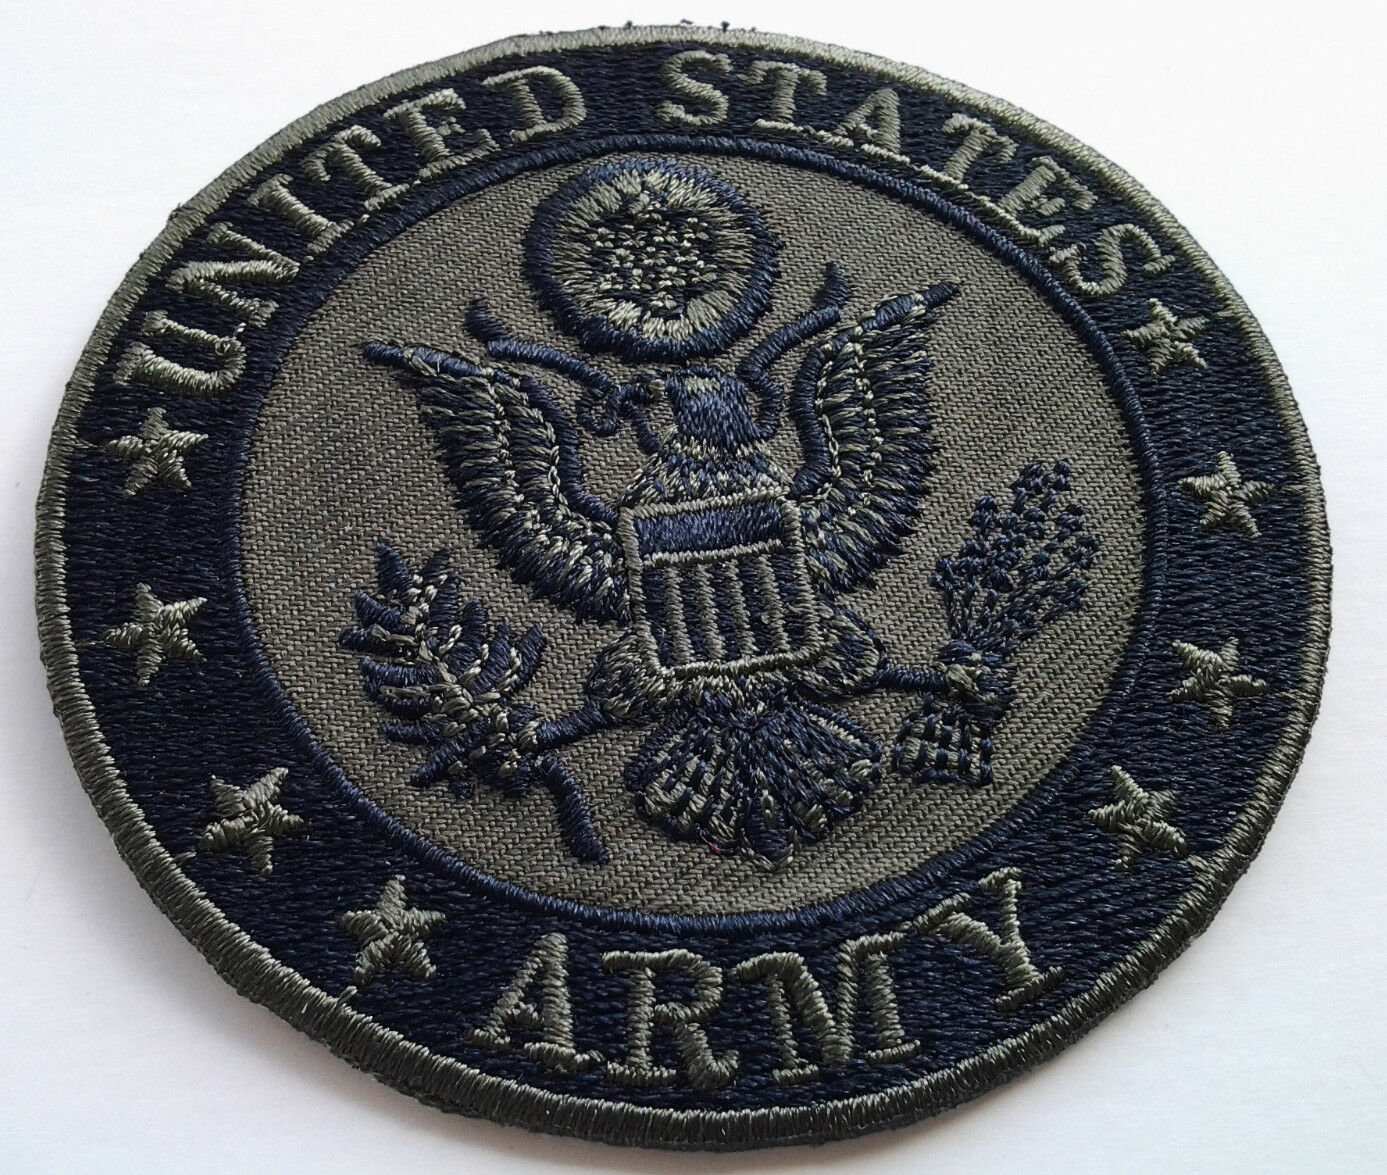 United States Army Subdued (3-1/16") Military Veteran Biker Patch Pm0895 Ee